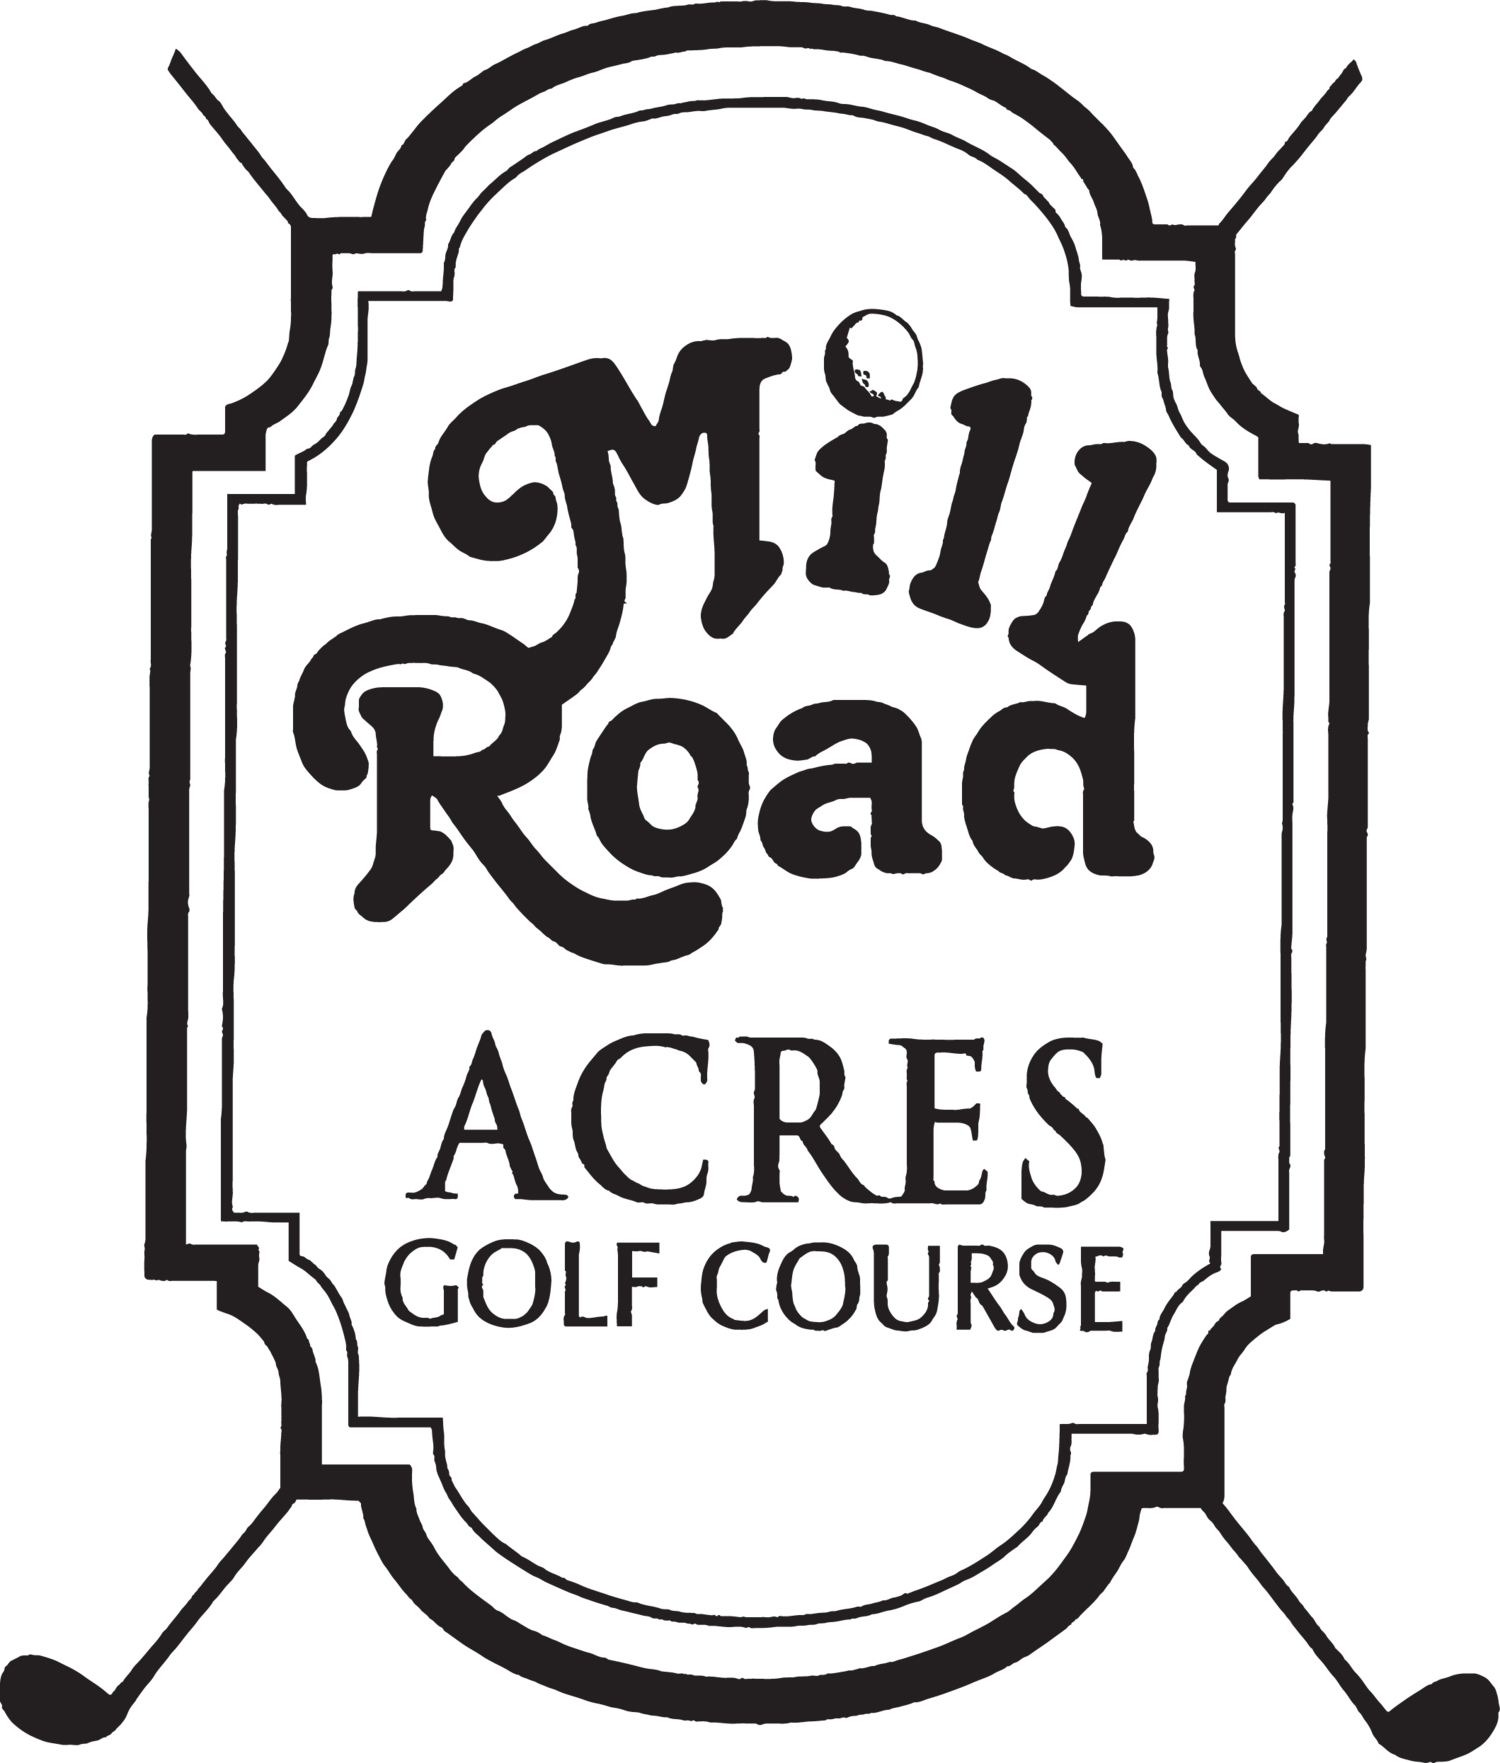 Mill Road Acres Golf Course 